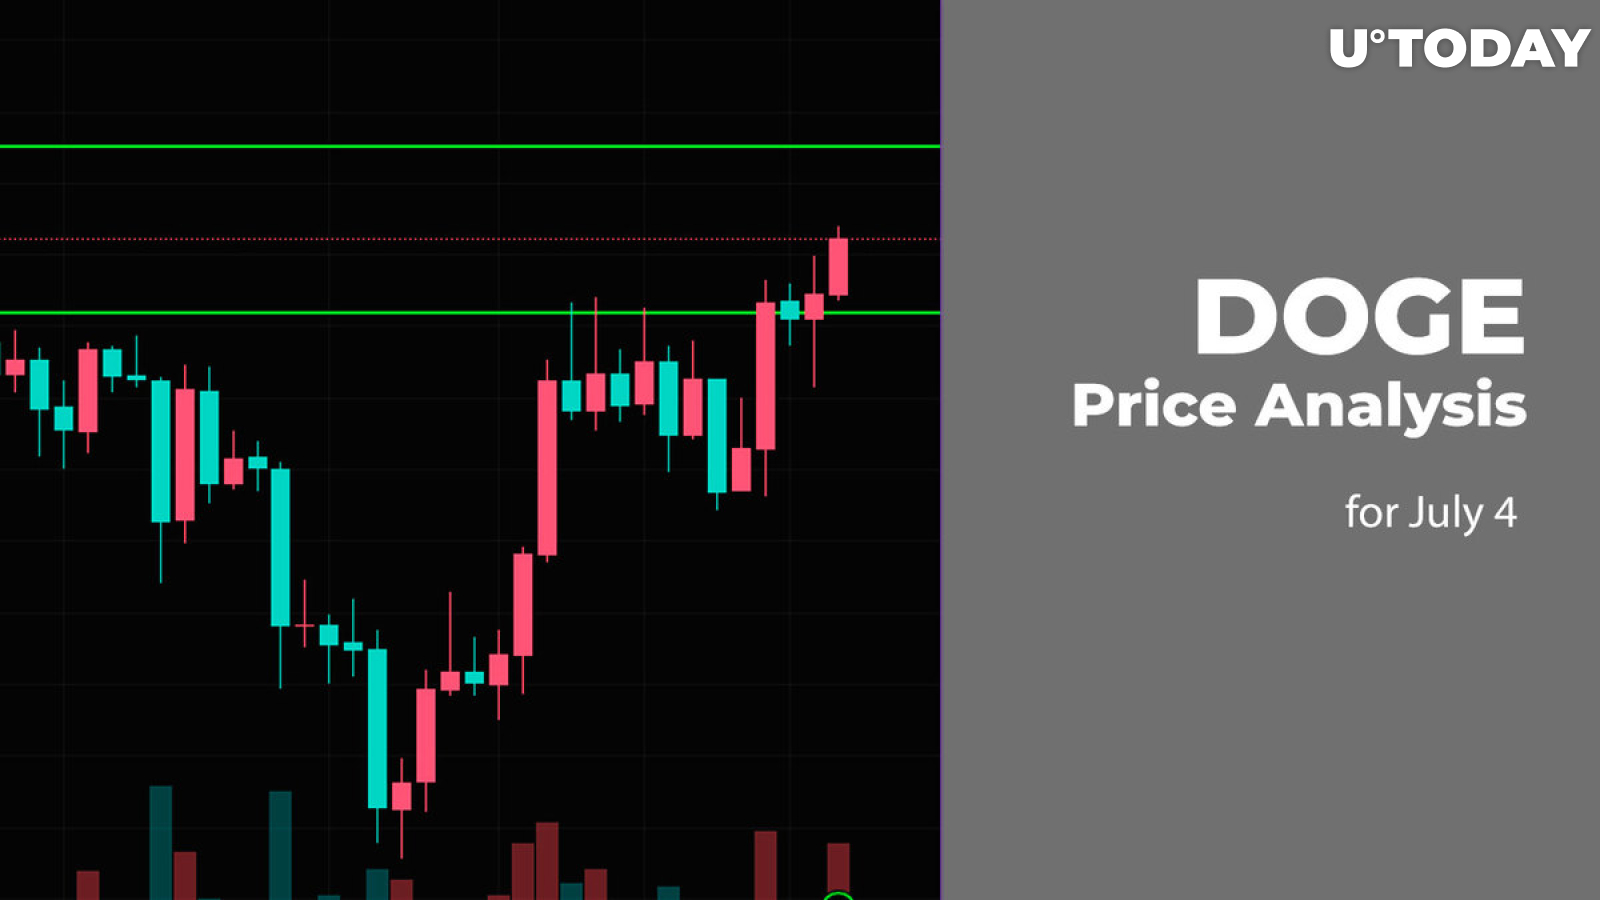 DOGE Price Analysis for July 4